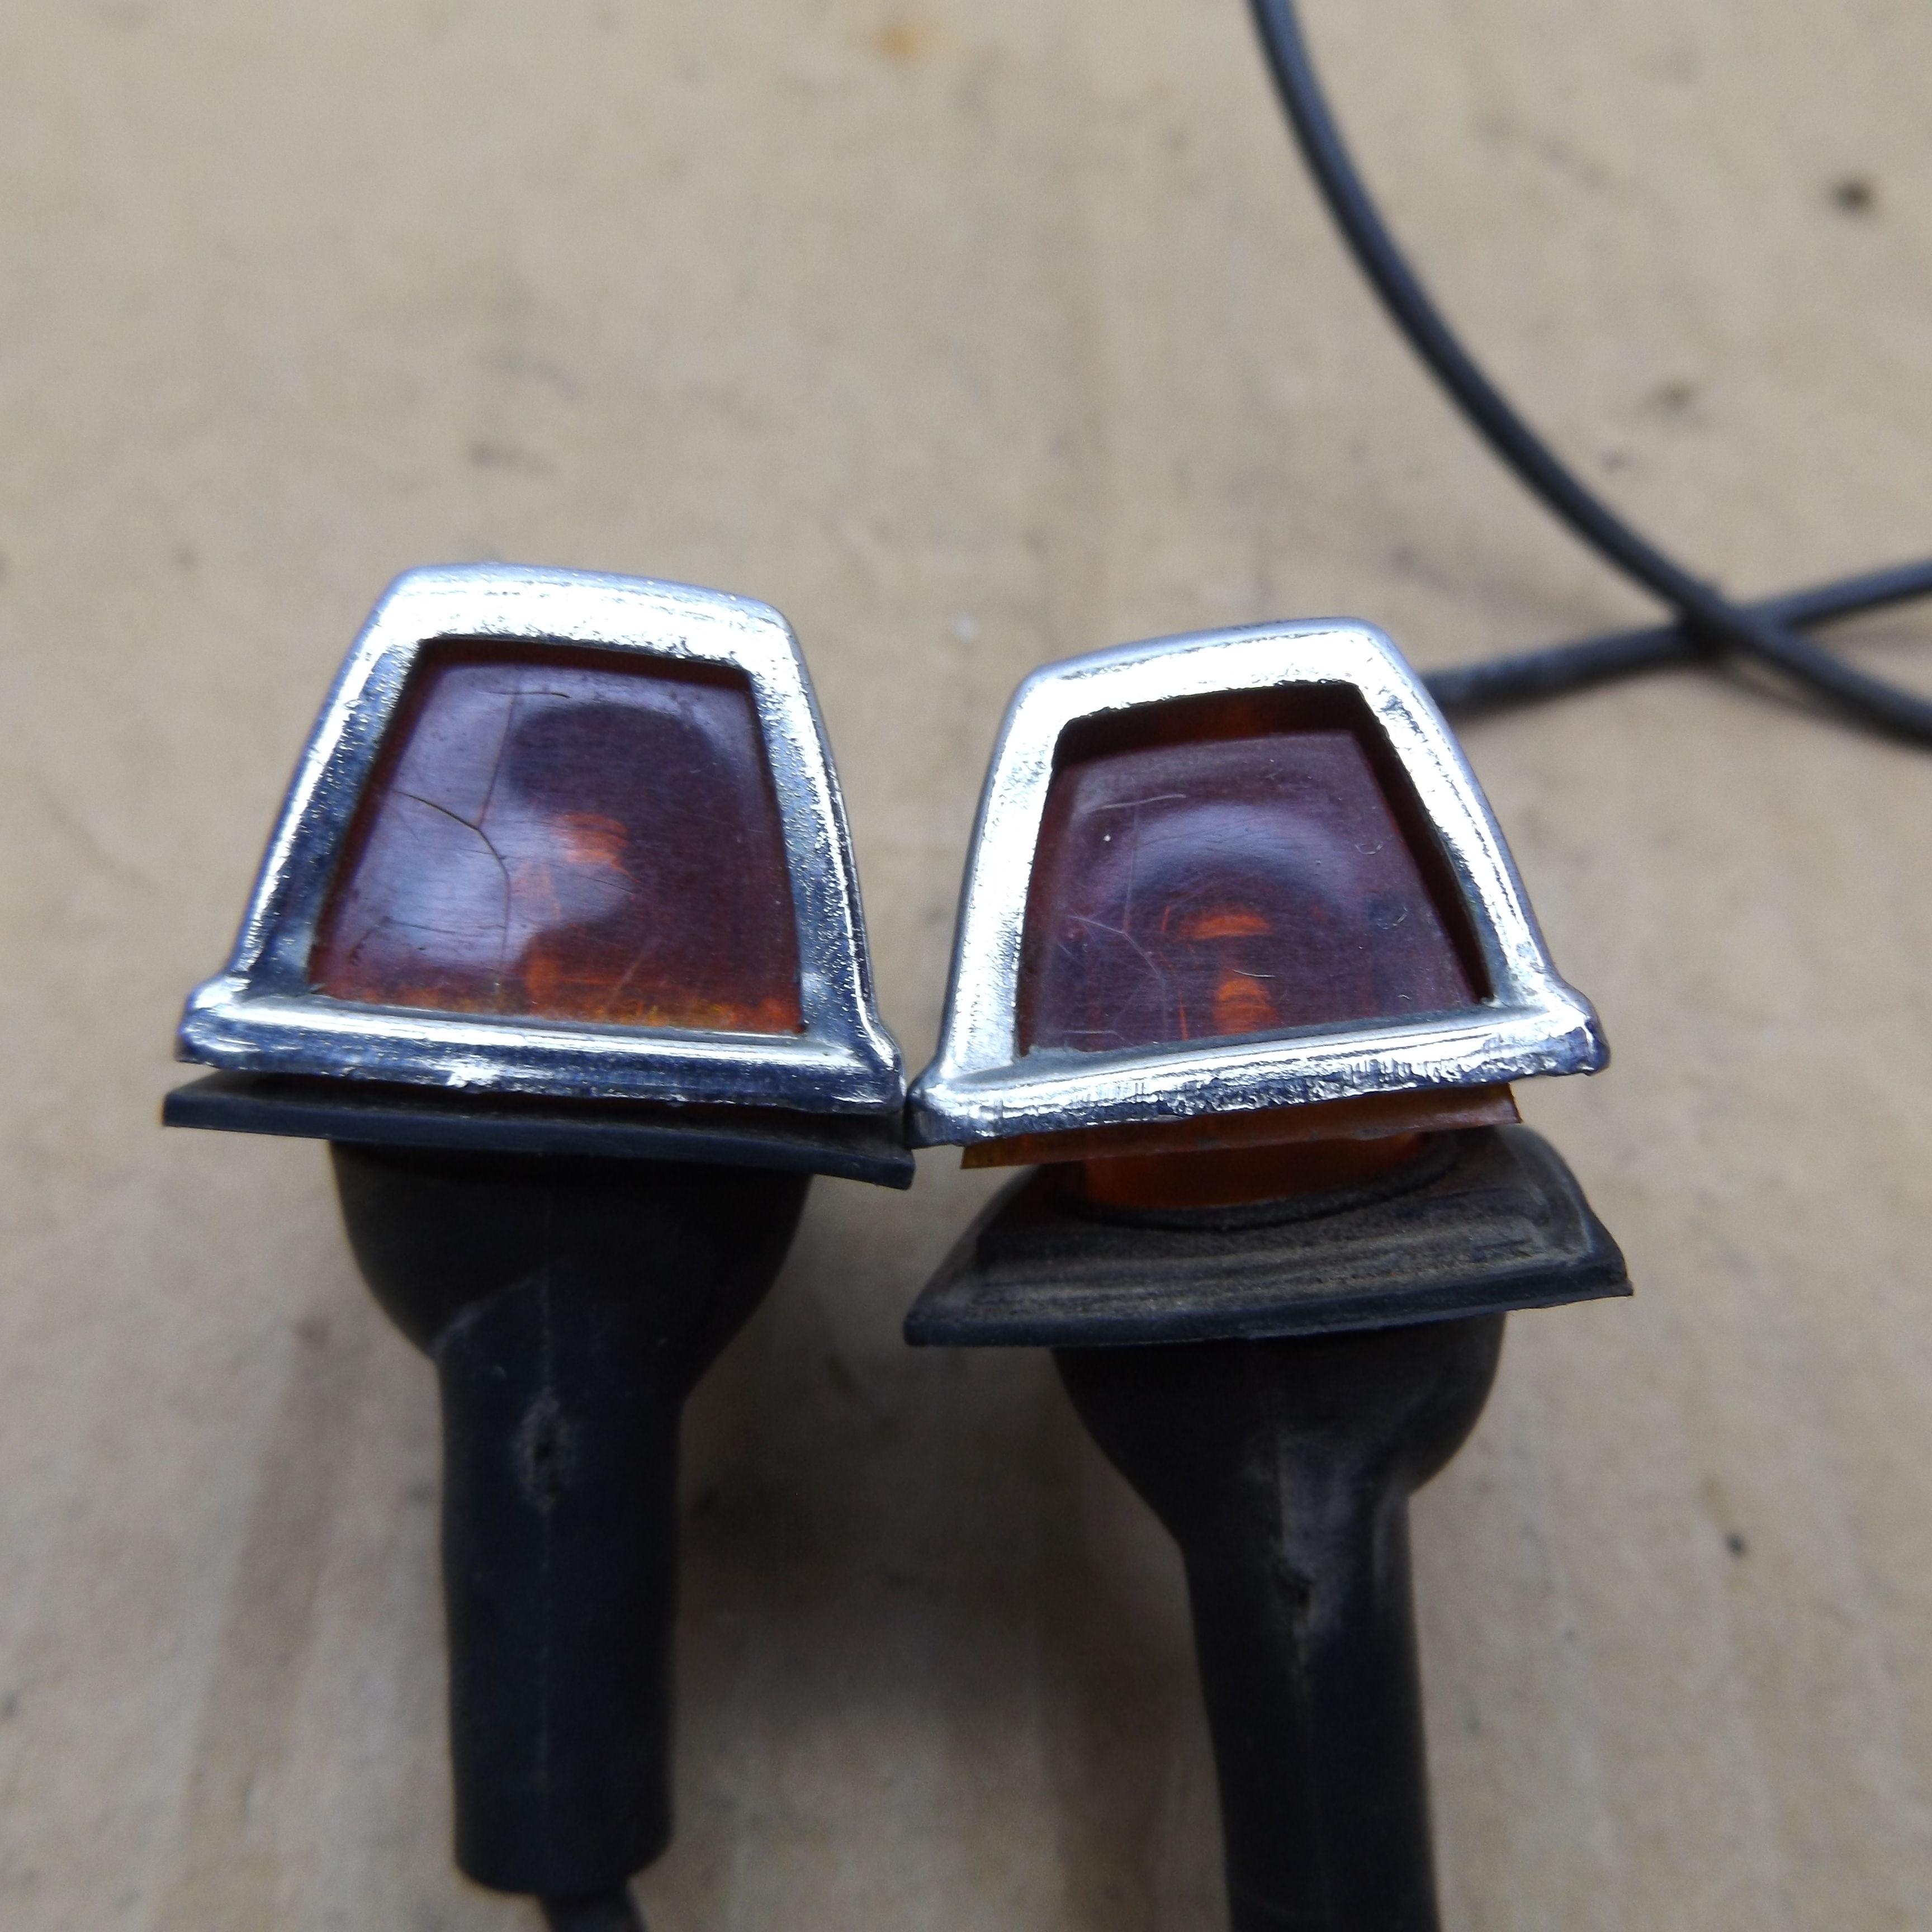 Turn Signal Indicator Lamp Assy# 3588746 / 3679255 - Pair - A - B - C - E -  F - L - M - R - Body - 1973-79 - USED - SHIPS FREE TO LOWER 48